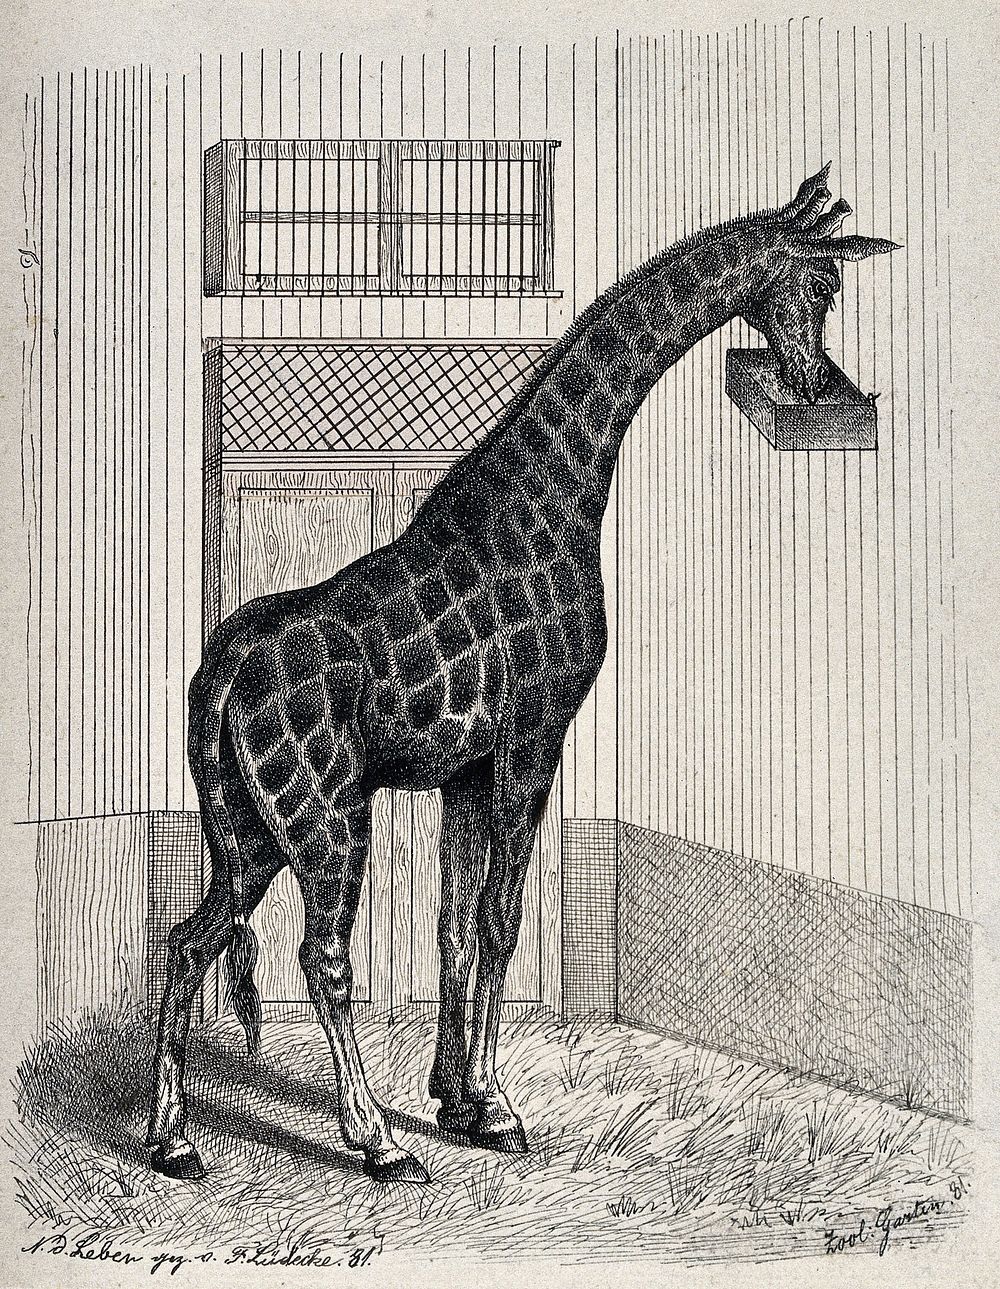 A giraffe eating from a raised trough in its enclosure. Reproduction of an etching by F. Lüdecke.